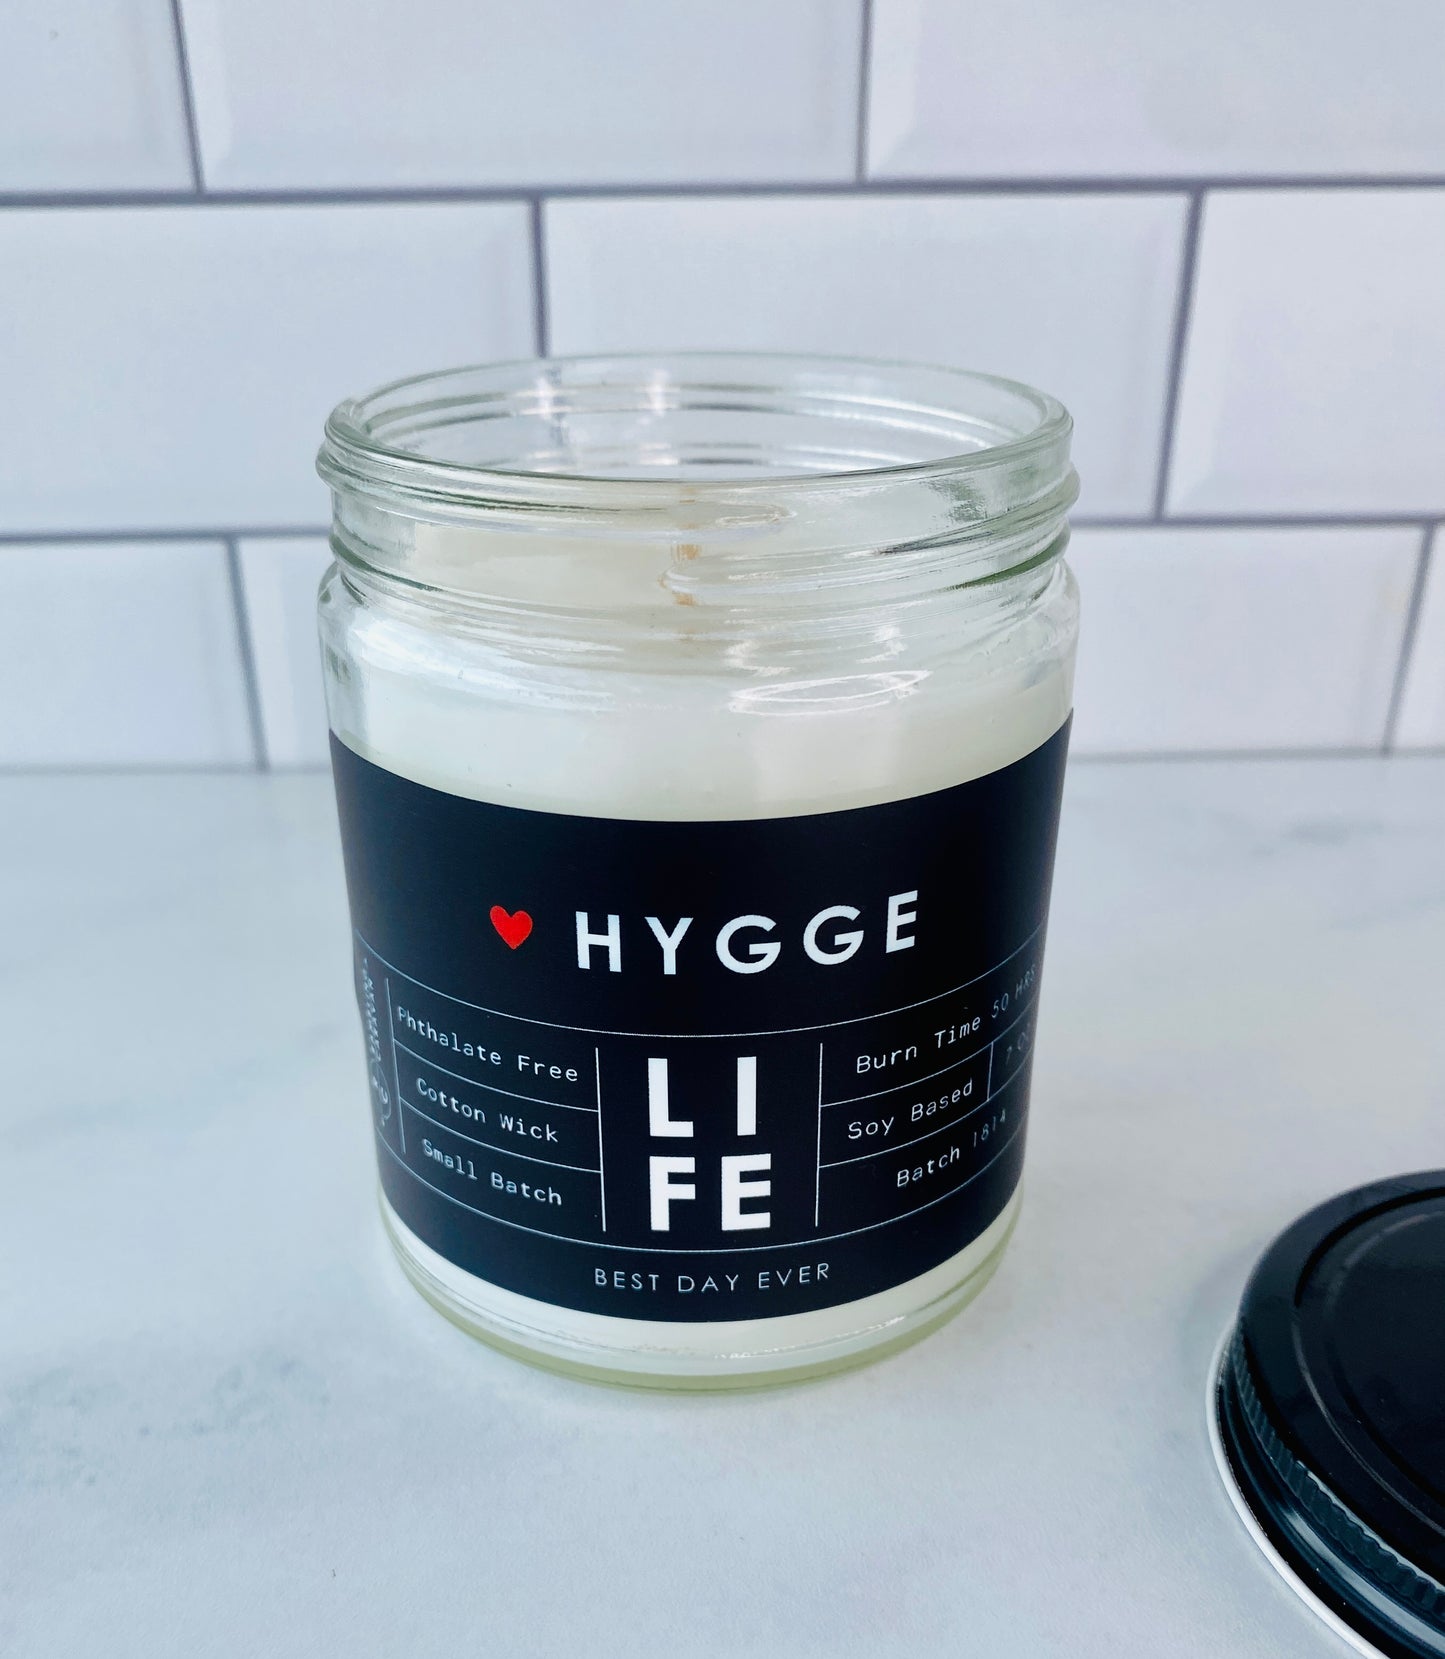 Hygge (Danish for comfort) Candle